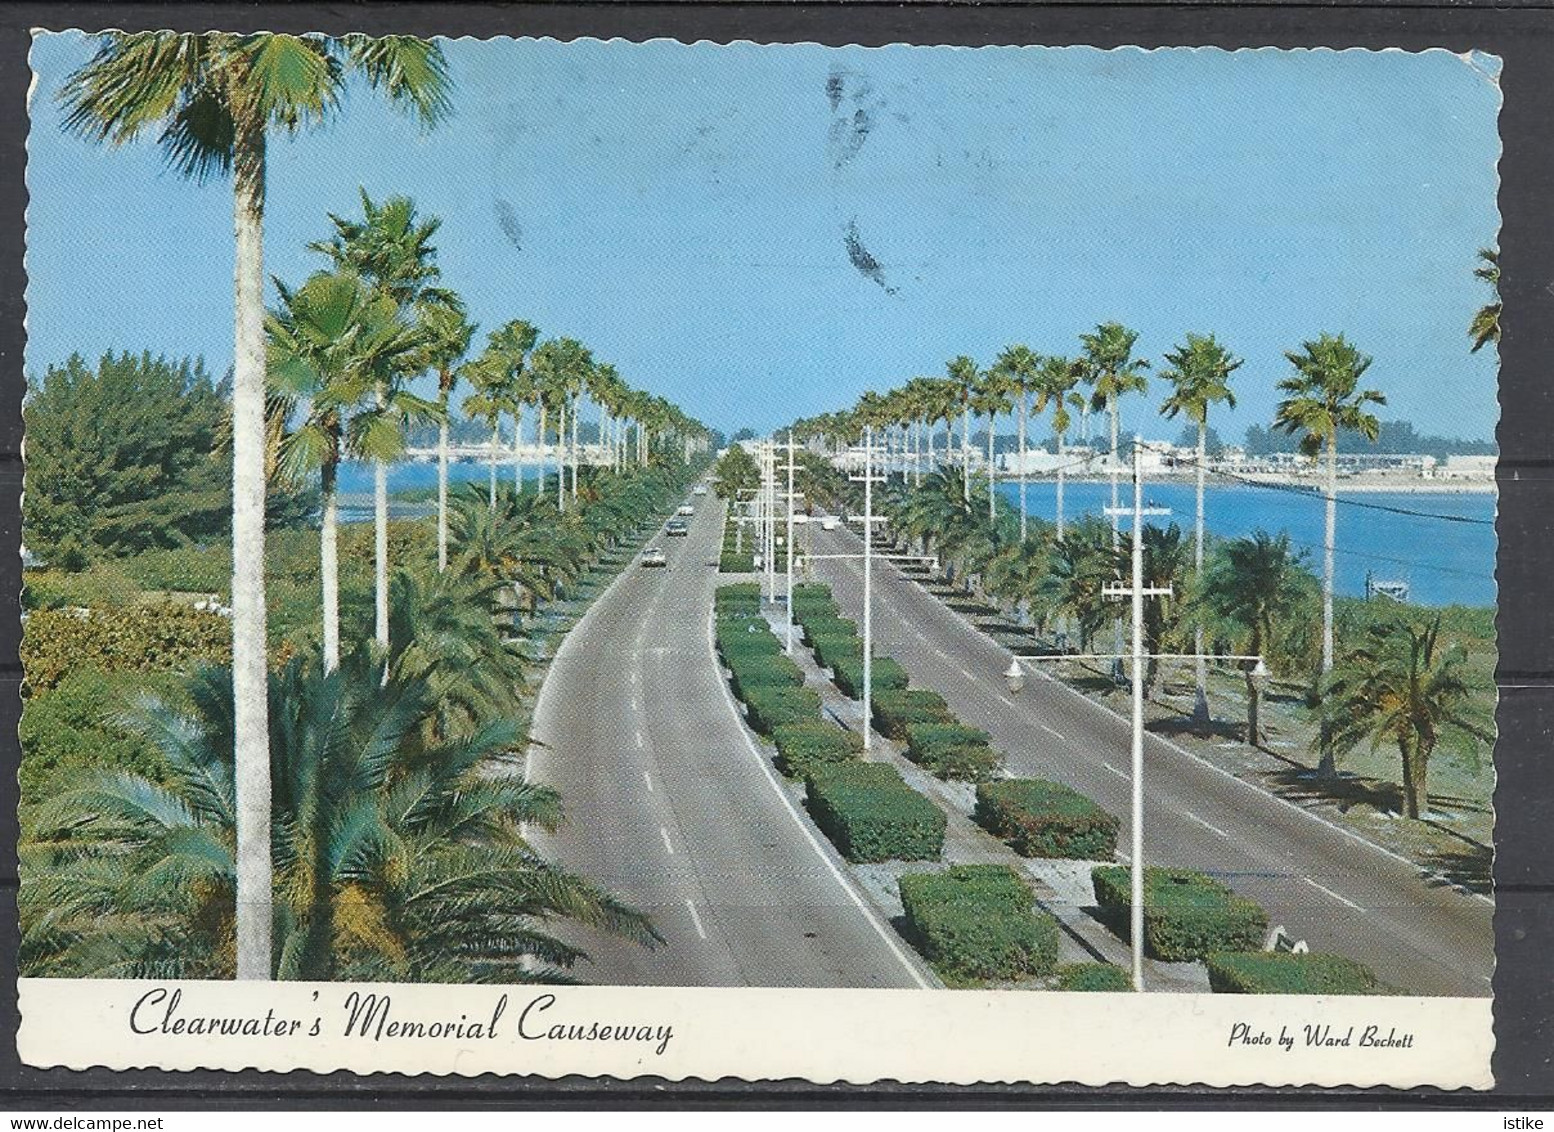 United States, FL, Clearwater, Memorial Causeway, 1981. - Clearwater